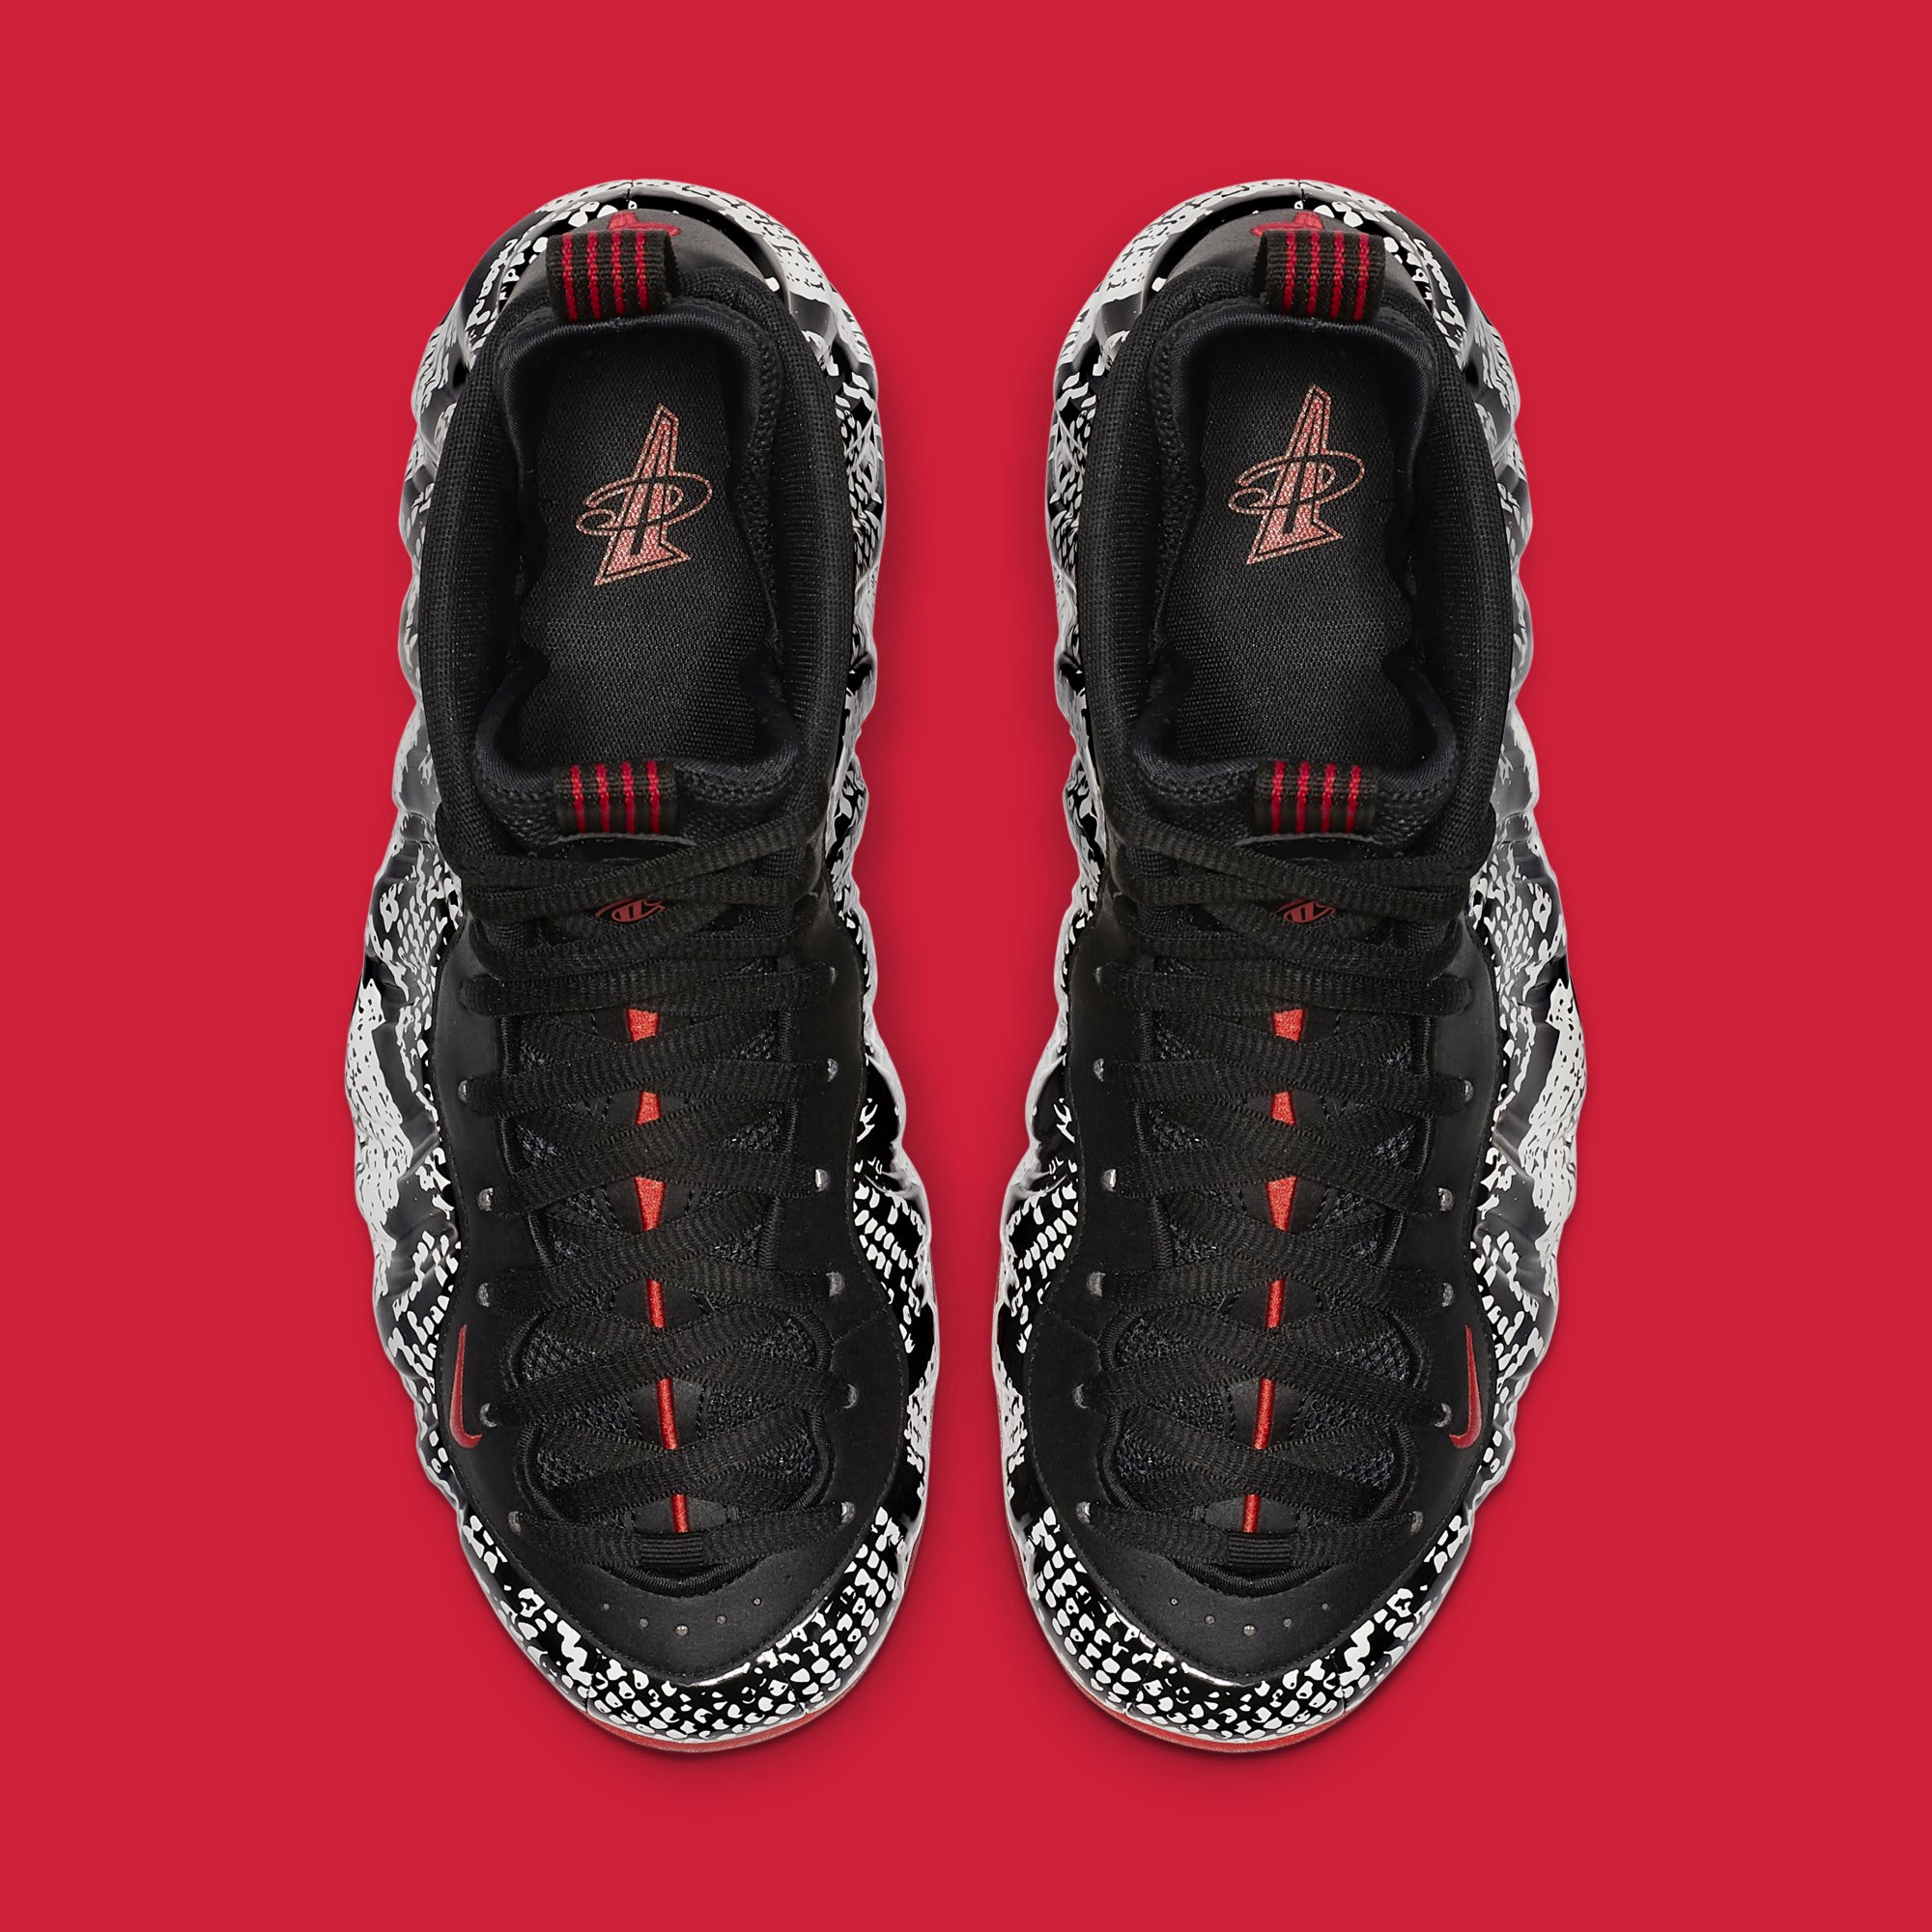 Nike Air Foamposite One "Snakeskin" Releases Next Month: Official Photos